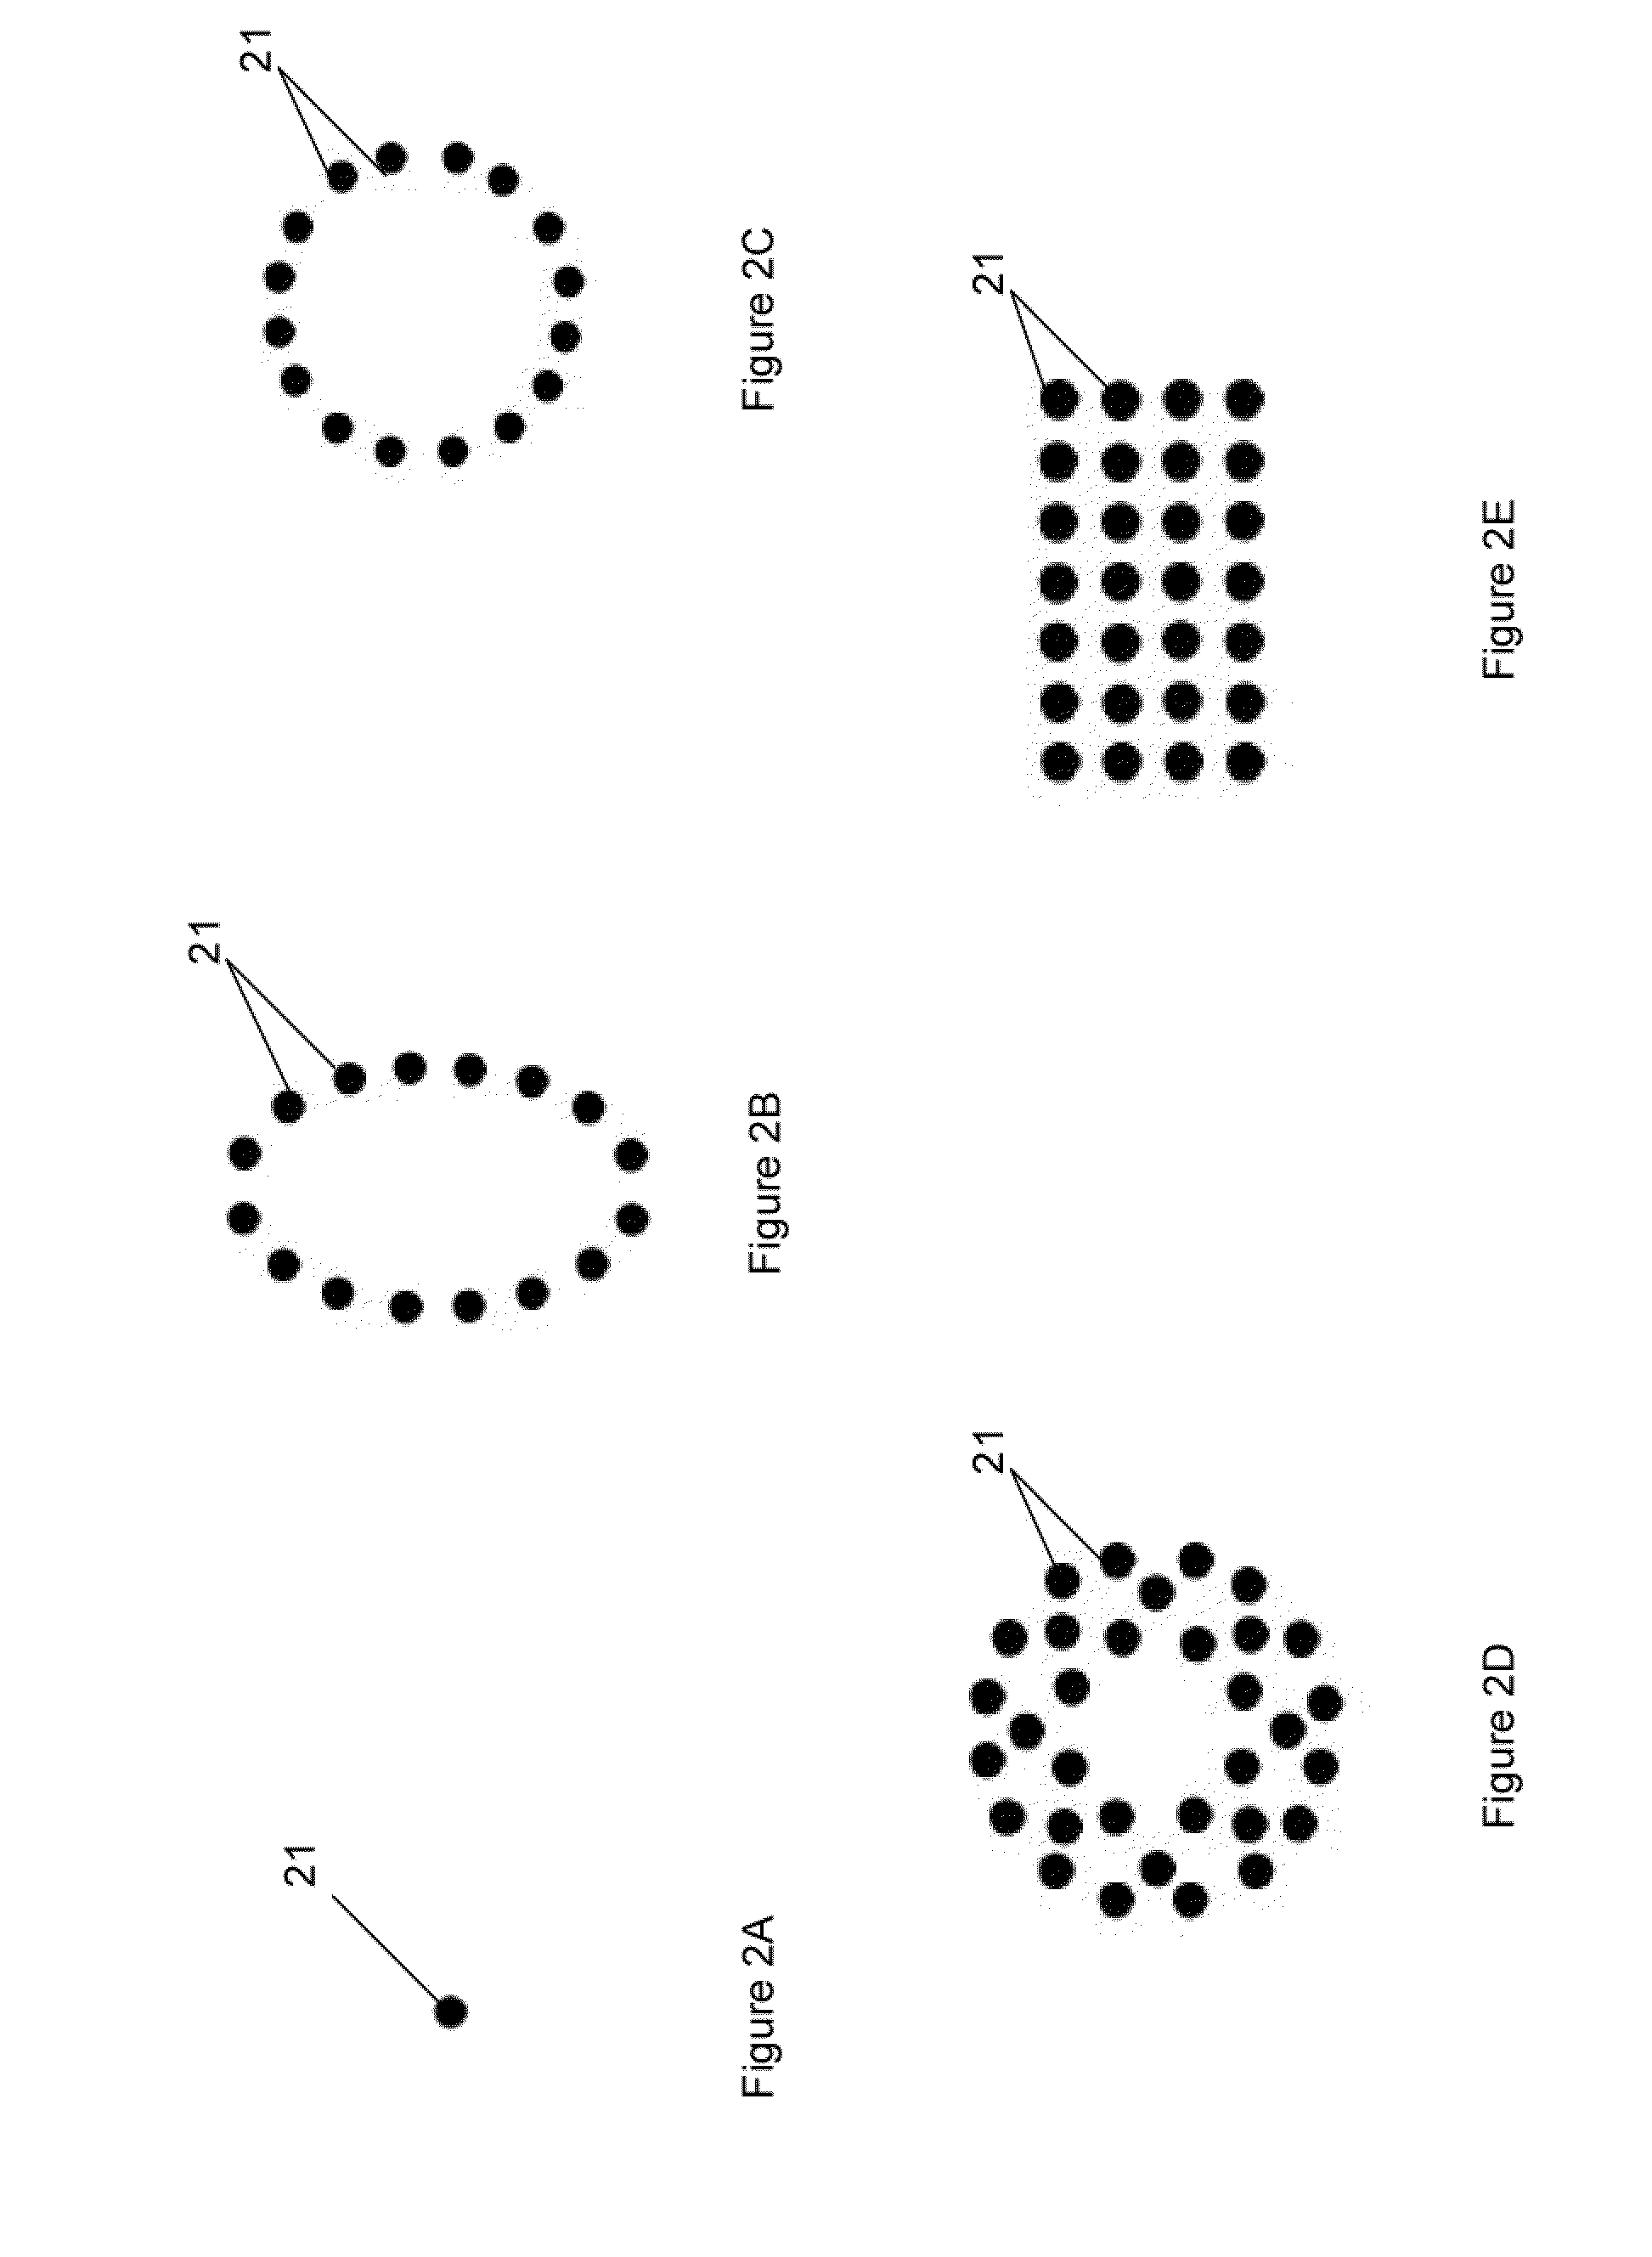 Coherent fiber bundle system and method for ophthalmic intervention